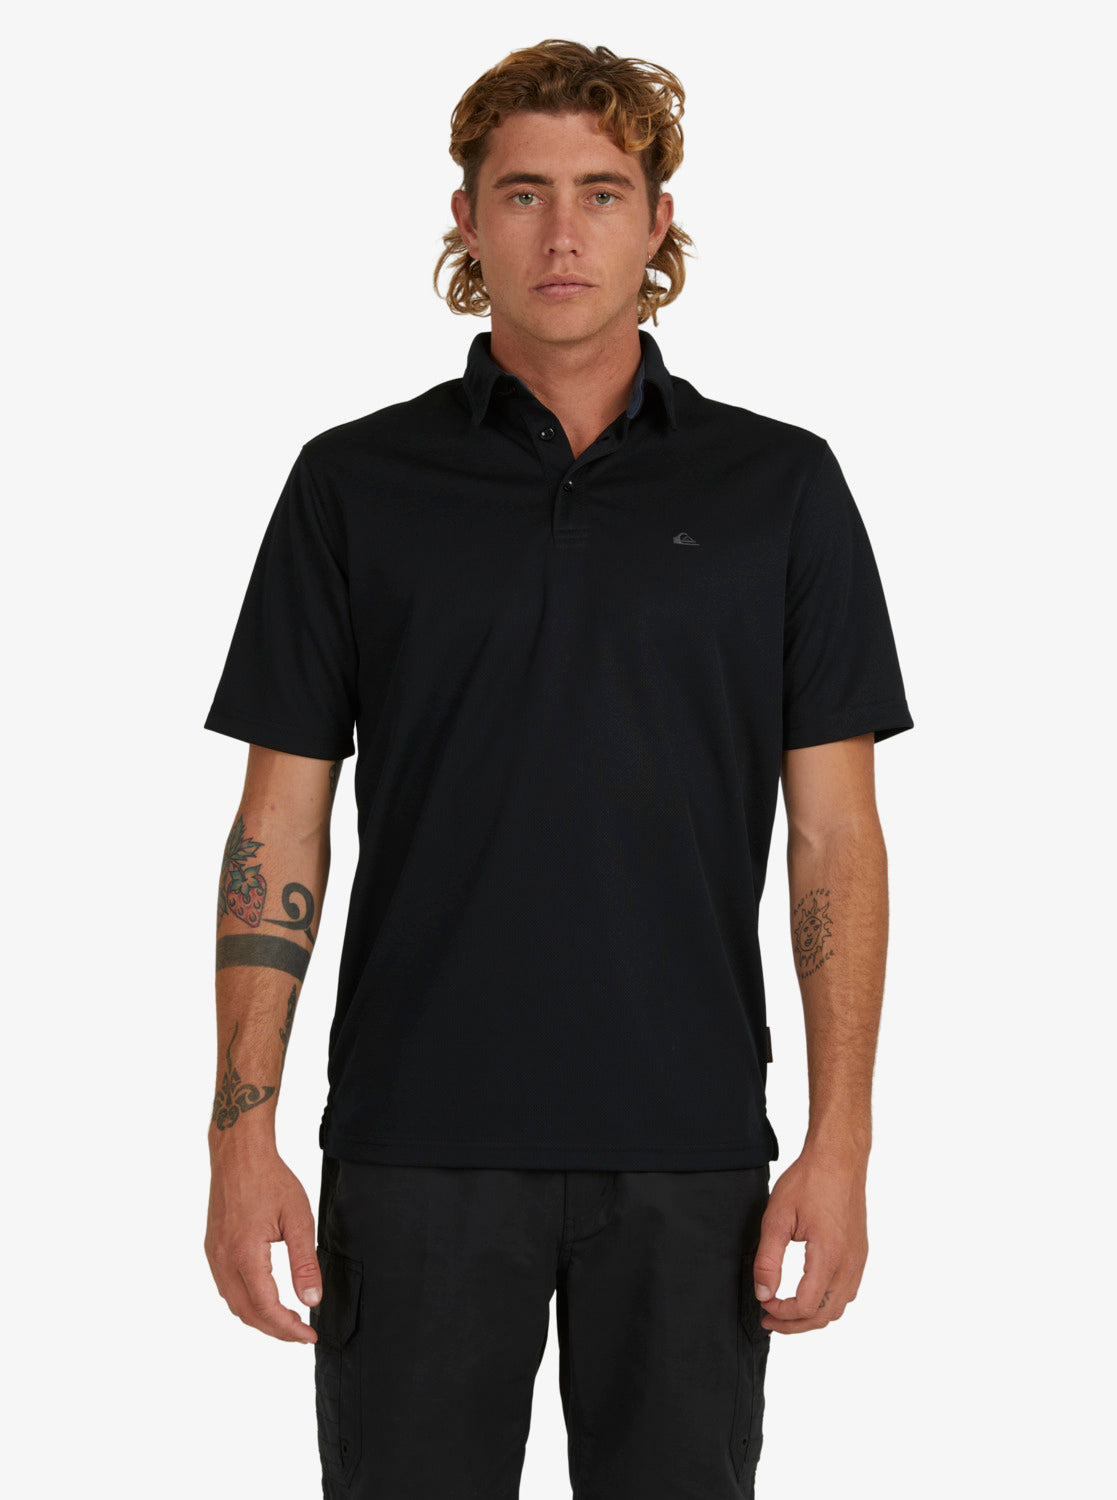 Quiksilver Water Polo 2 Polo Shirt in black